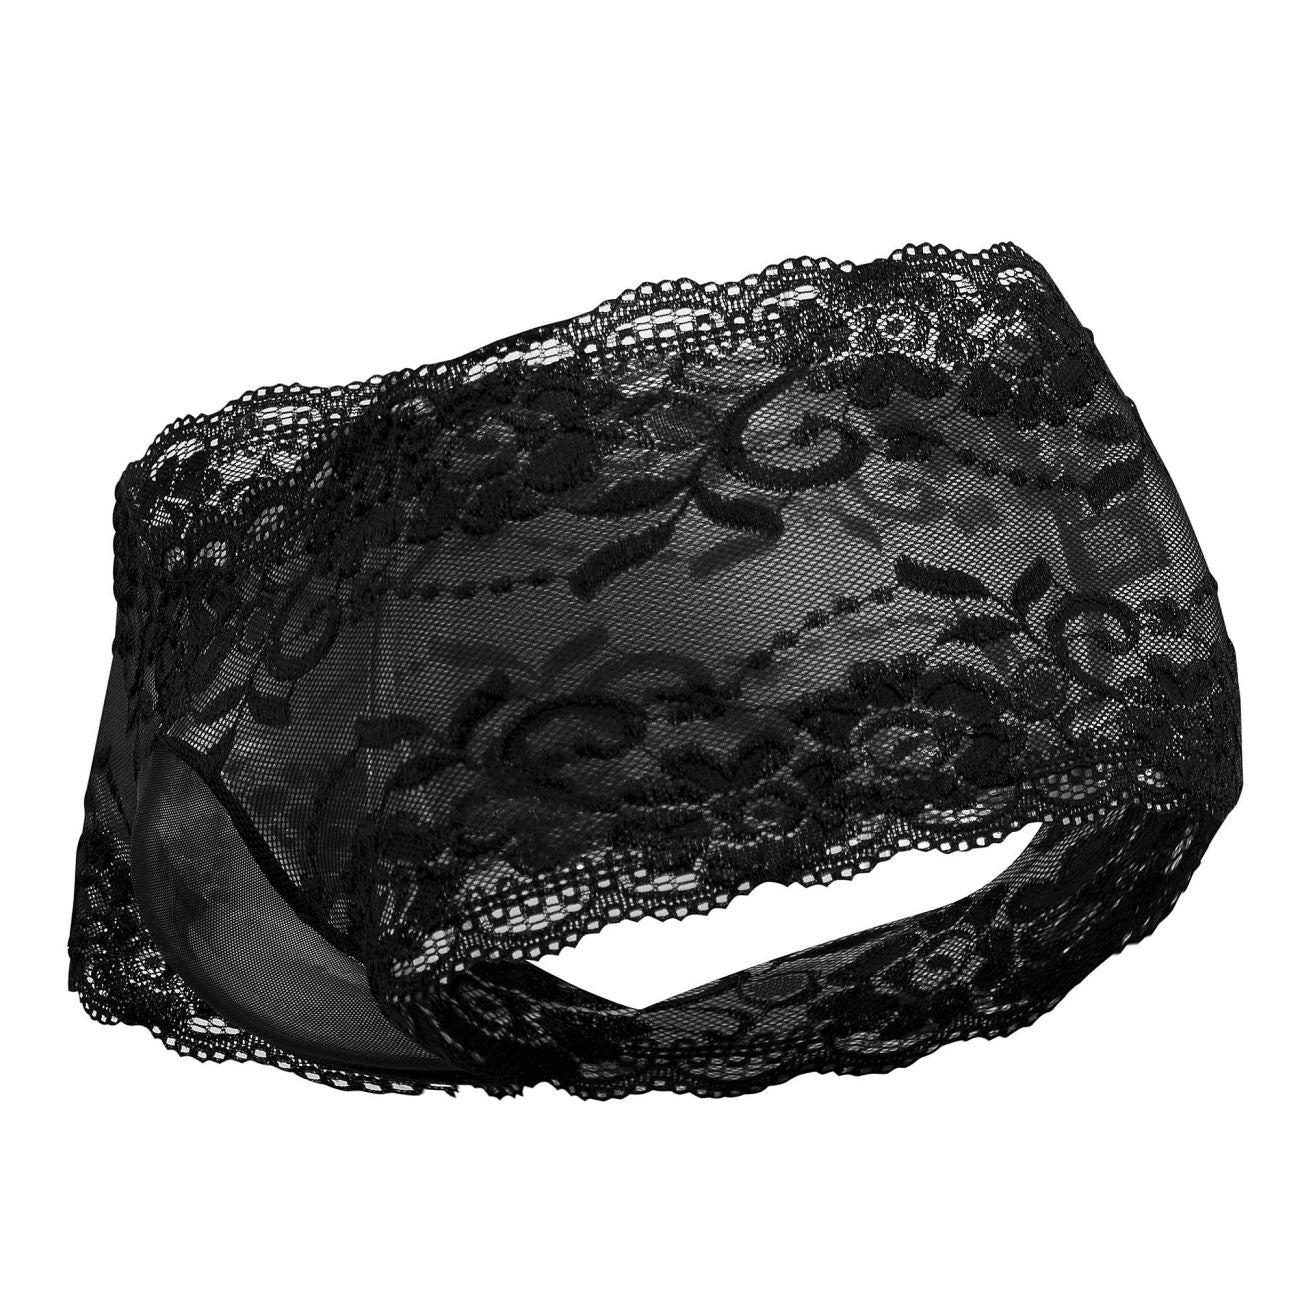 Male Power Sassy Lace Mini Short Sheer Pouch